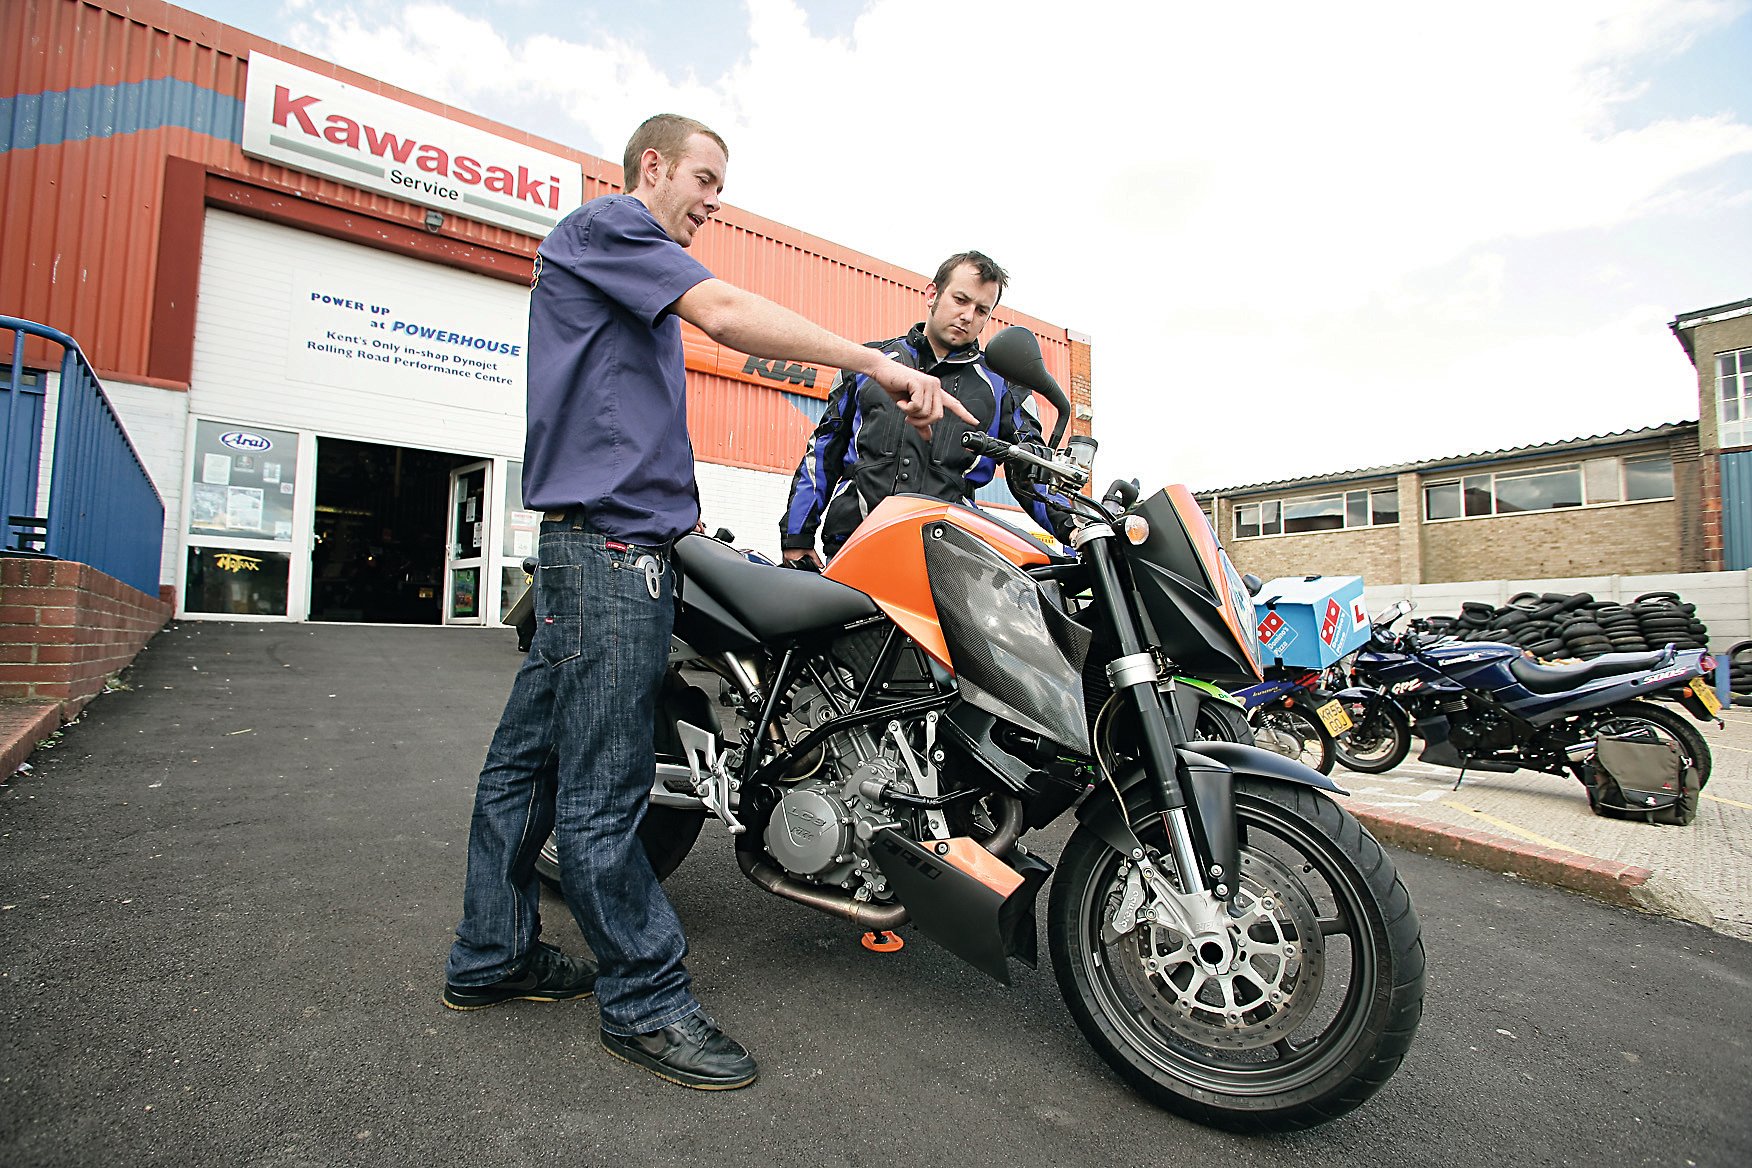 Motorcyclist inspects bike for sale